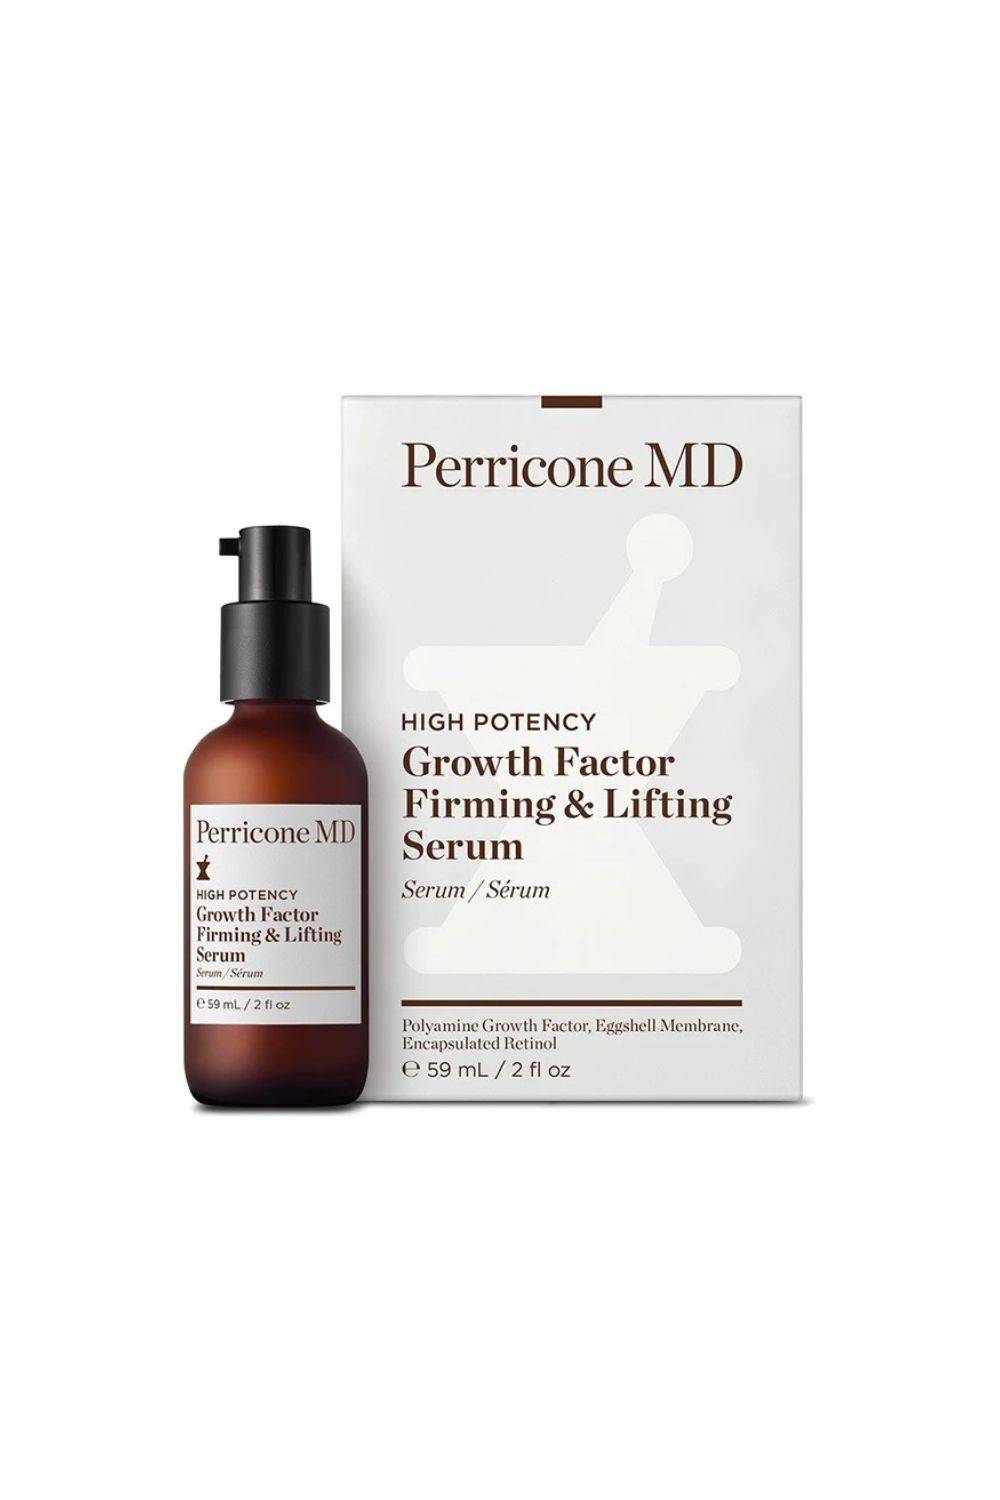 Growth Factor Firming & Lifting Serum de Perricone MD